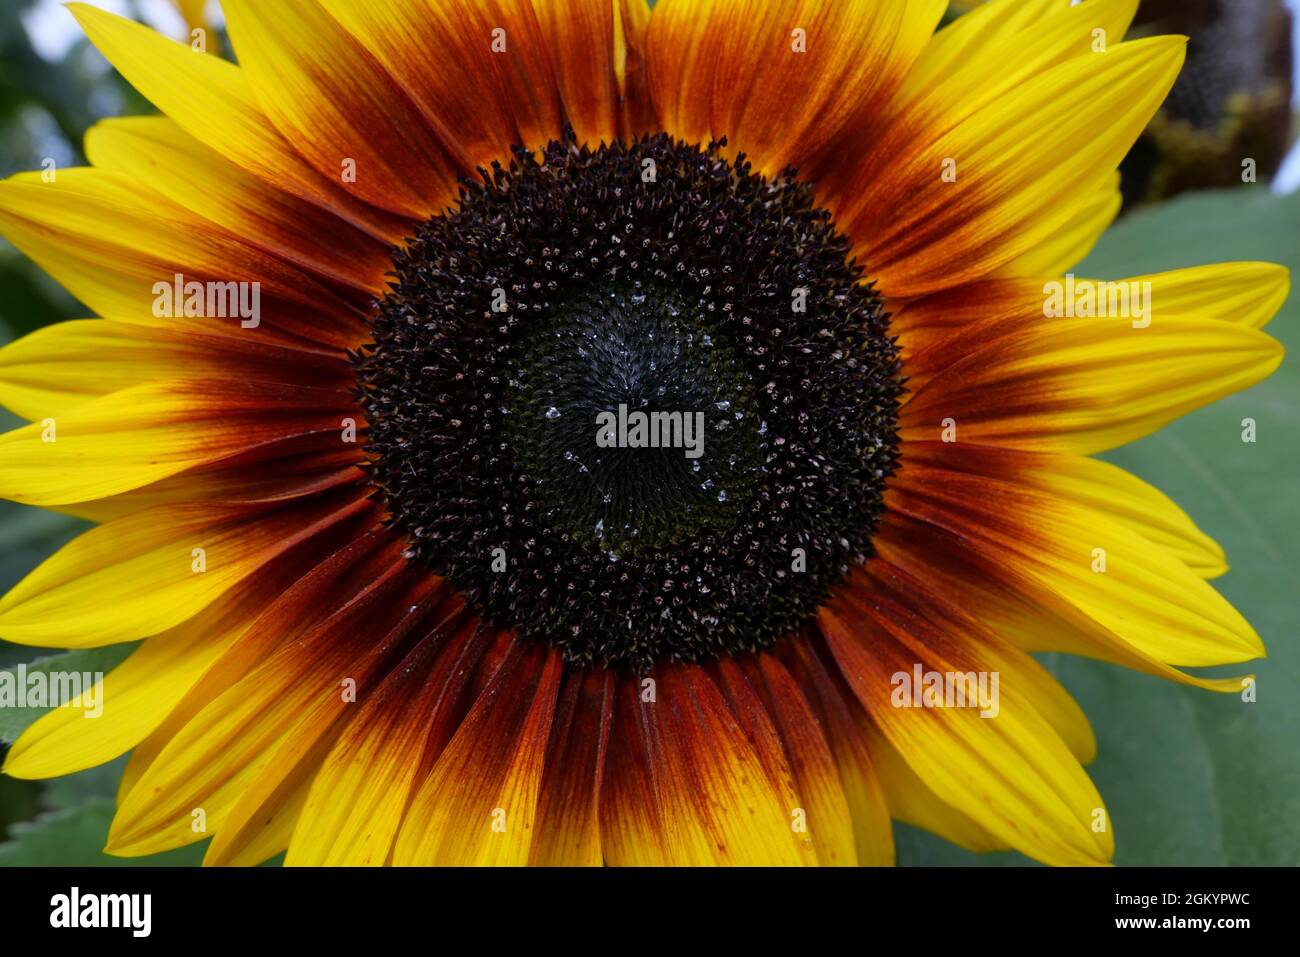 Beautiful vibrant yellow and brown sunflower with brown stamens and foliage Stock Photo